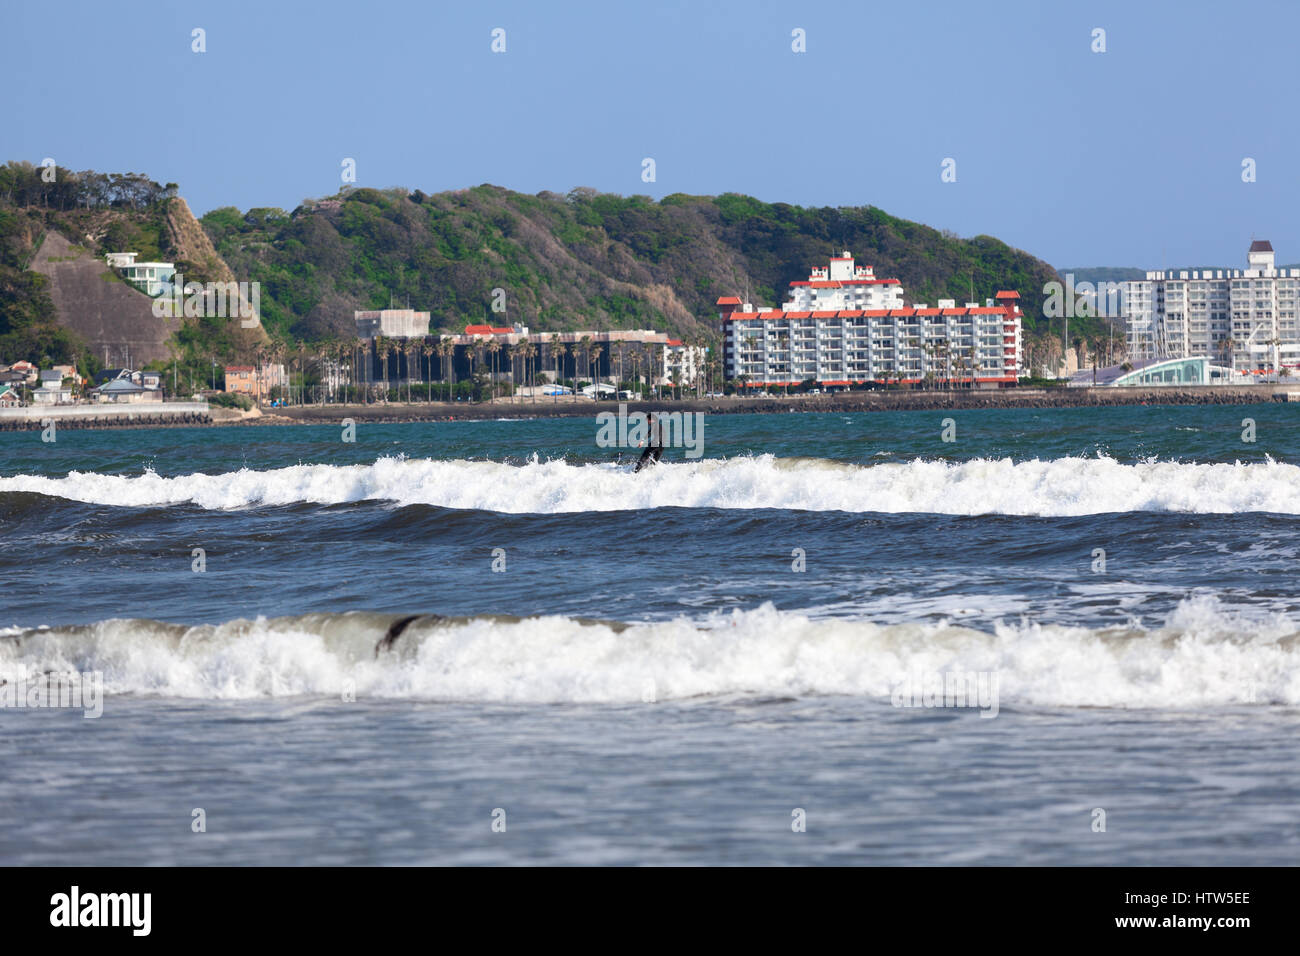 KAMAKURA, JAPAN - CIRCA APR, 2013: Japanese surfer stands on the top of the wave. The Yuigahama beach. The Sagami Bay is famous for surfing. Coast of  Stock Photo